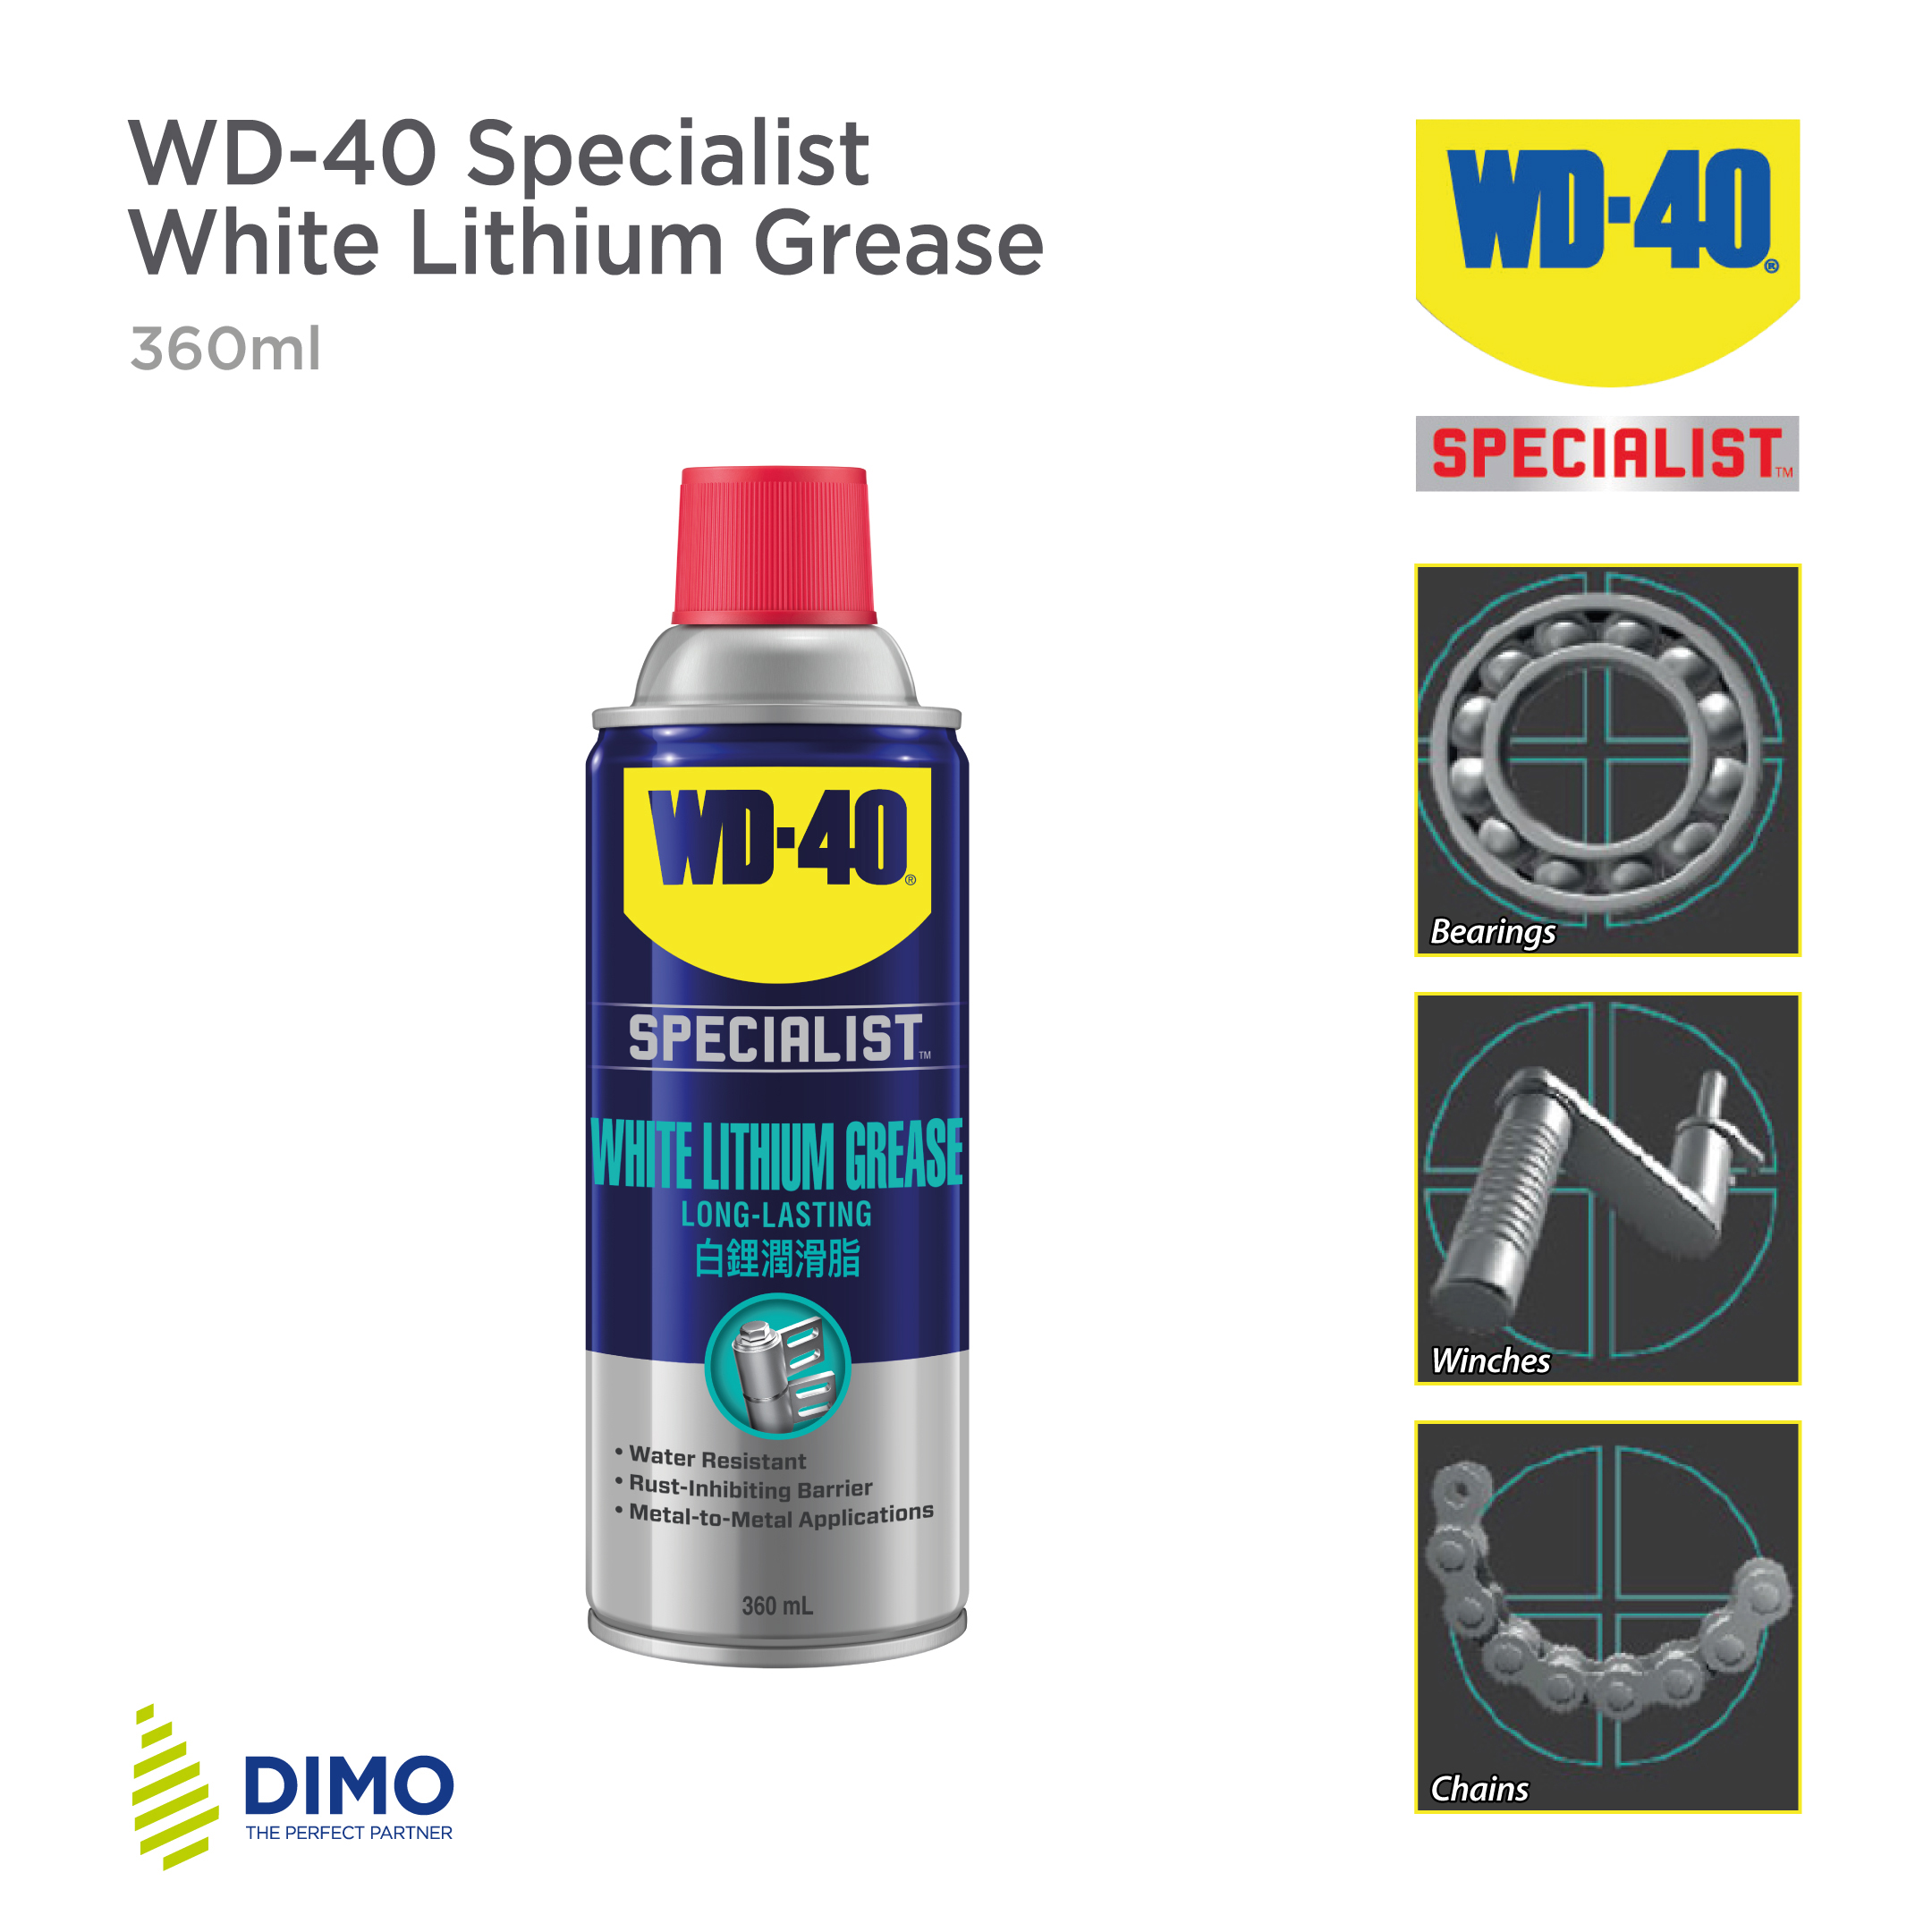 WD-40-Specialist-White-Lithium-Grease-360ml copy